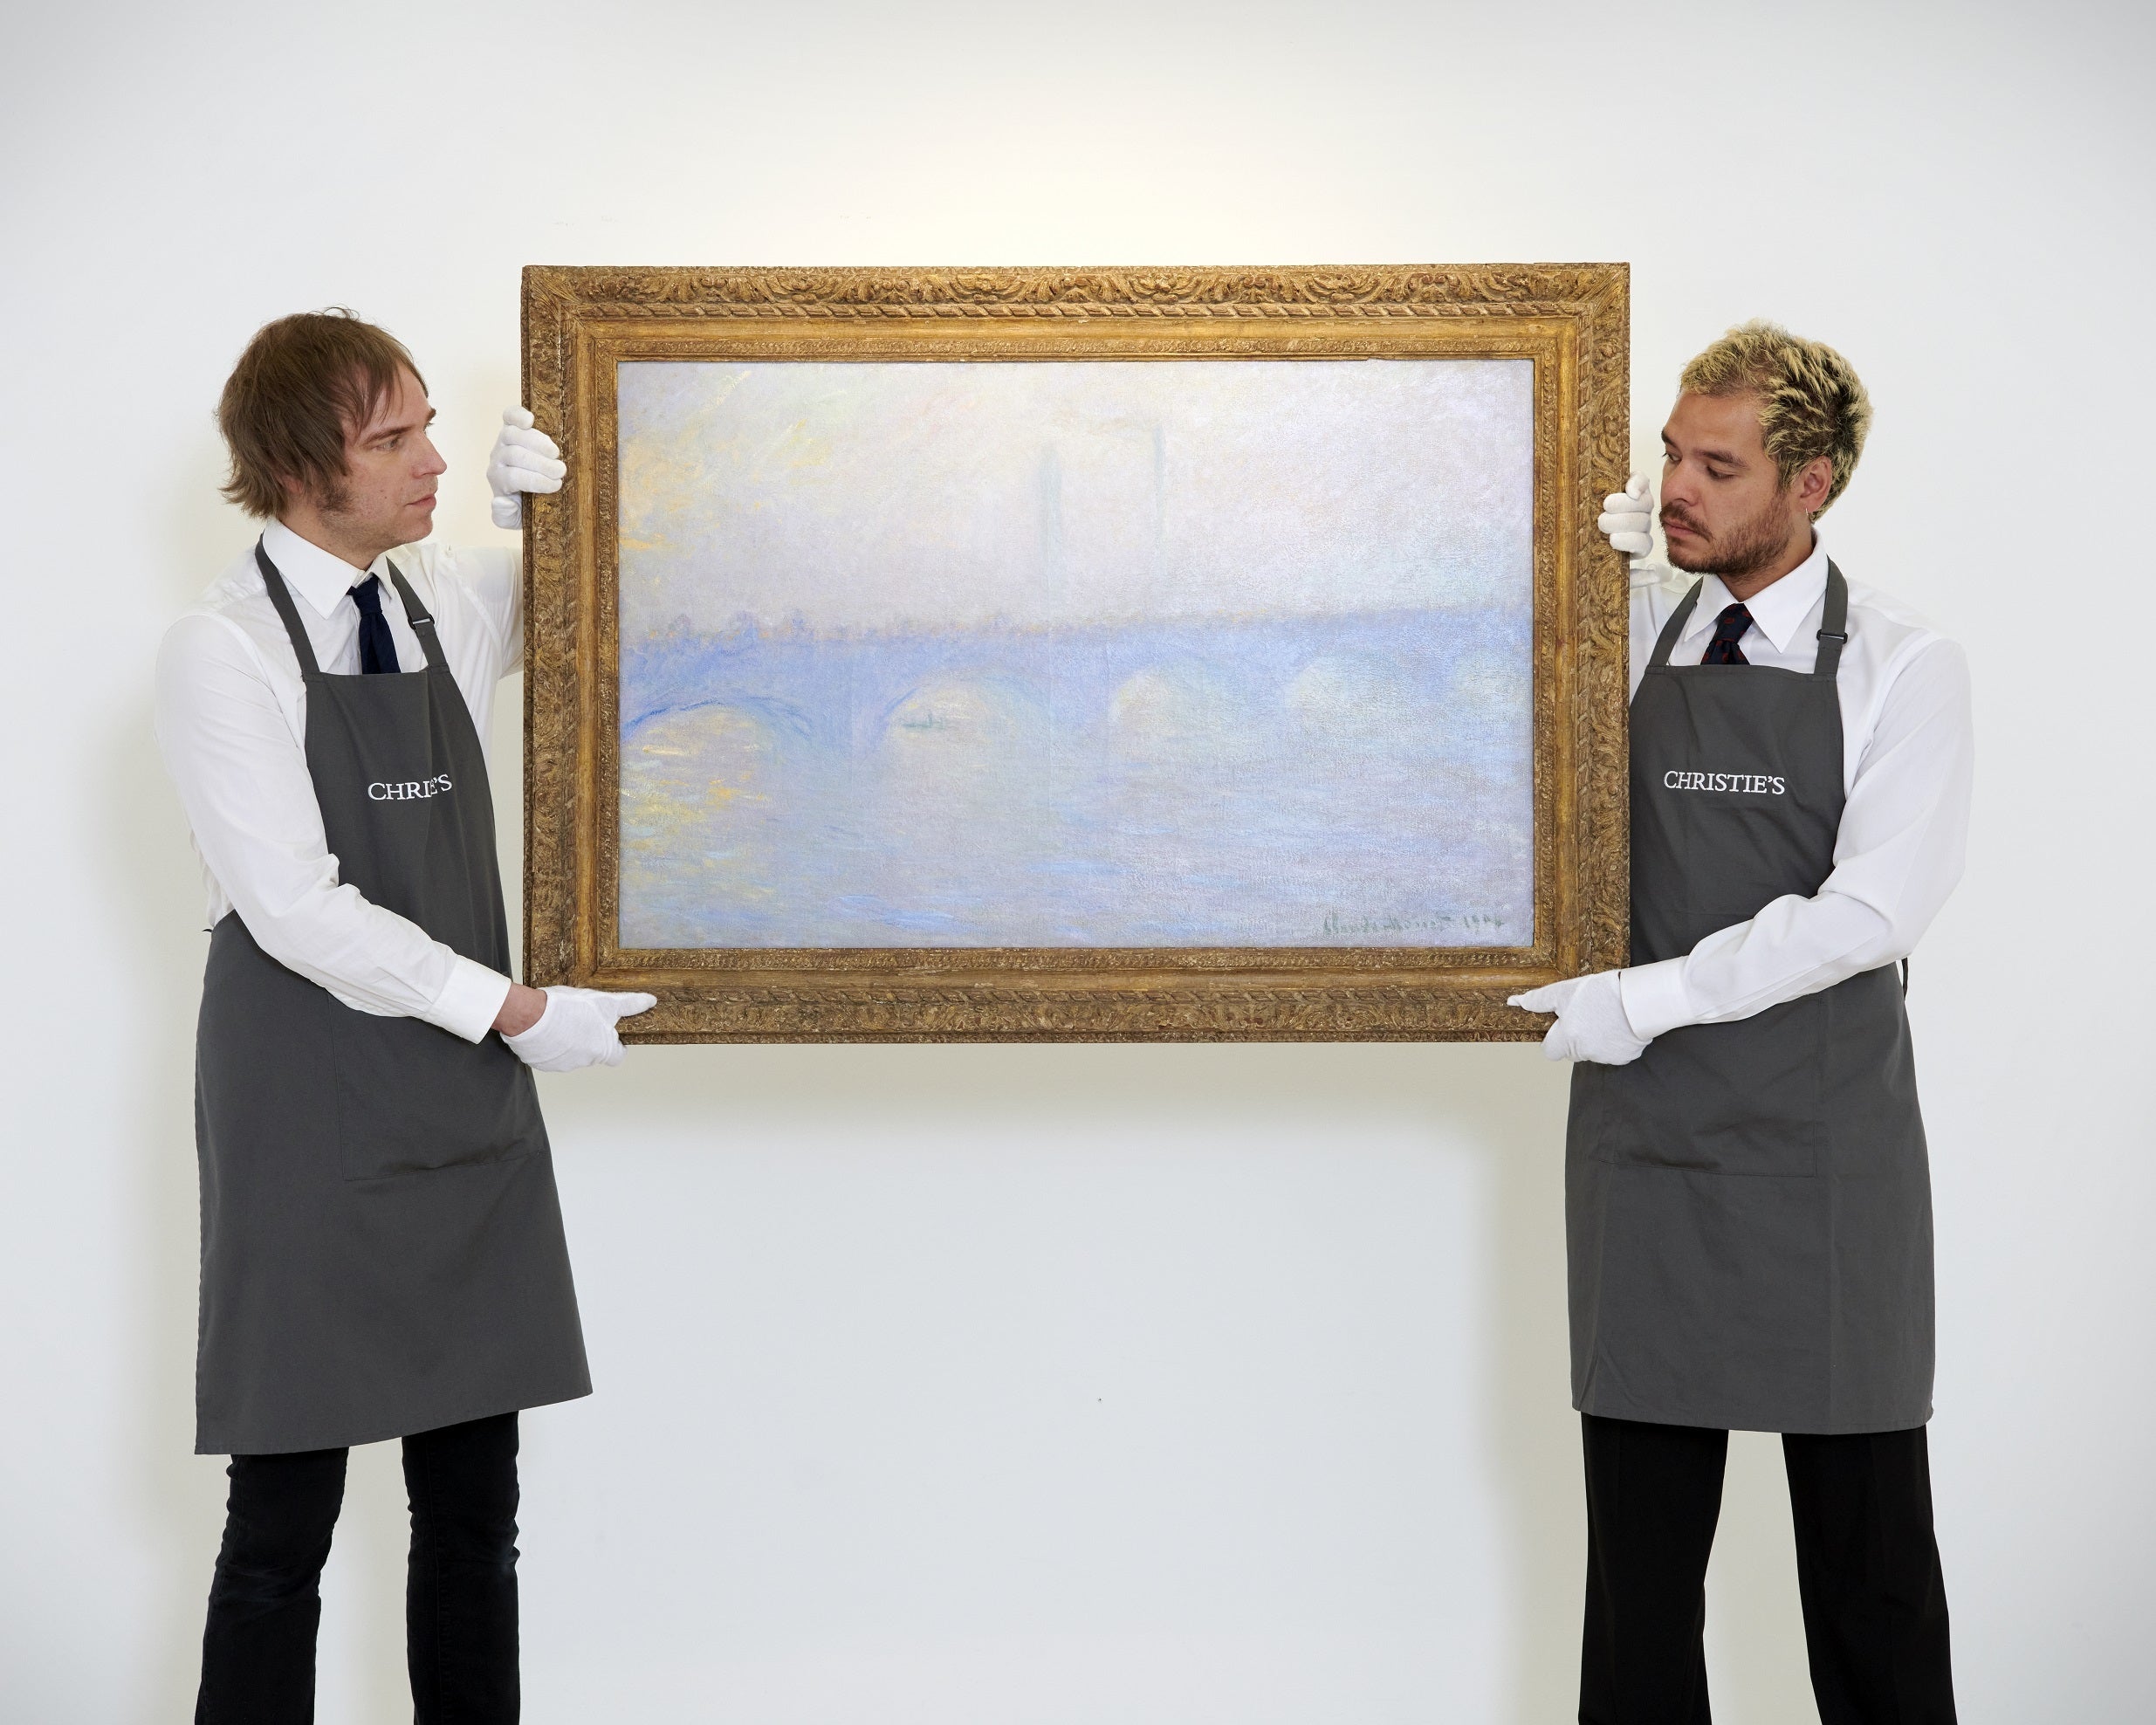 Claude Monet’s Waterloo Bridge, Effet de Brume, is to be sold at auction by Christie’s in June (Christie’s Images LTD 2022/PA)